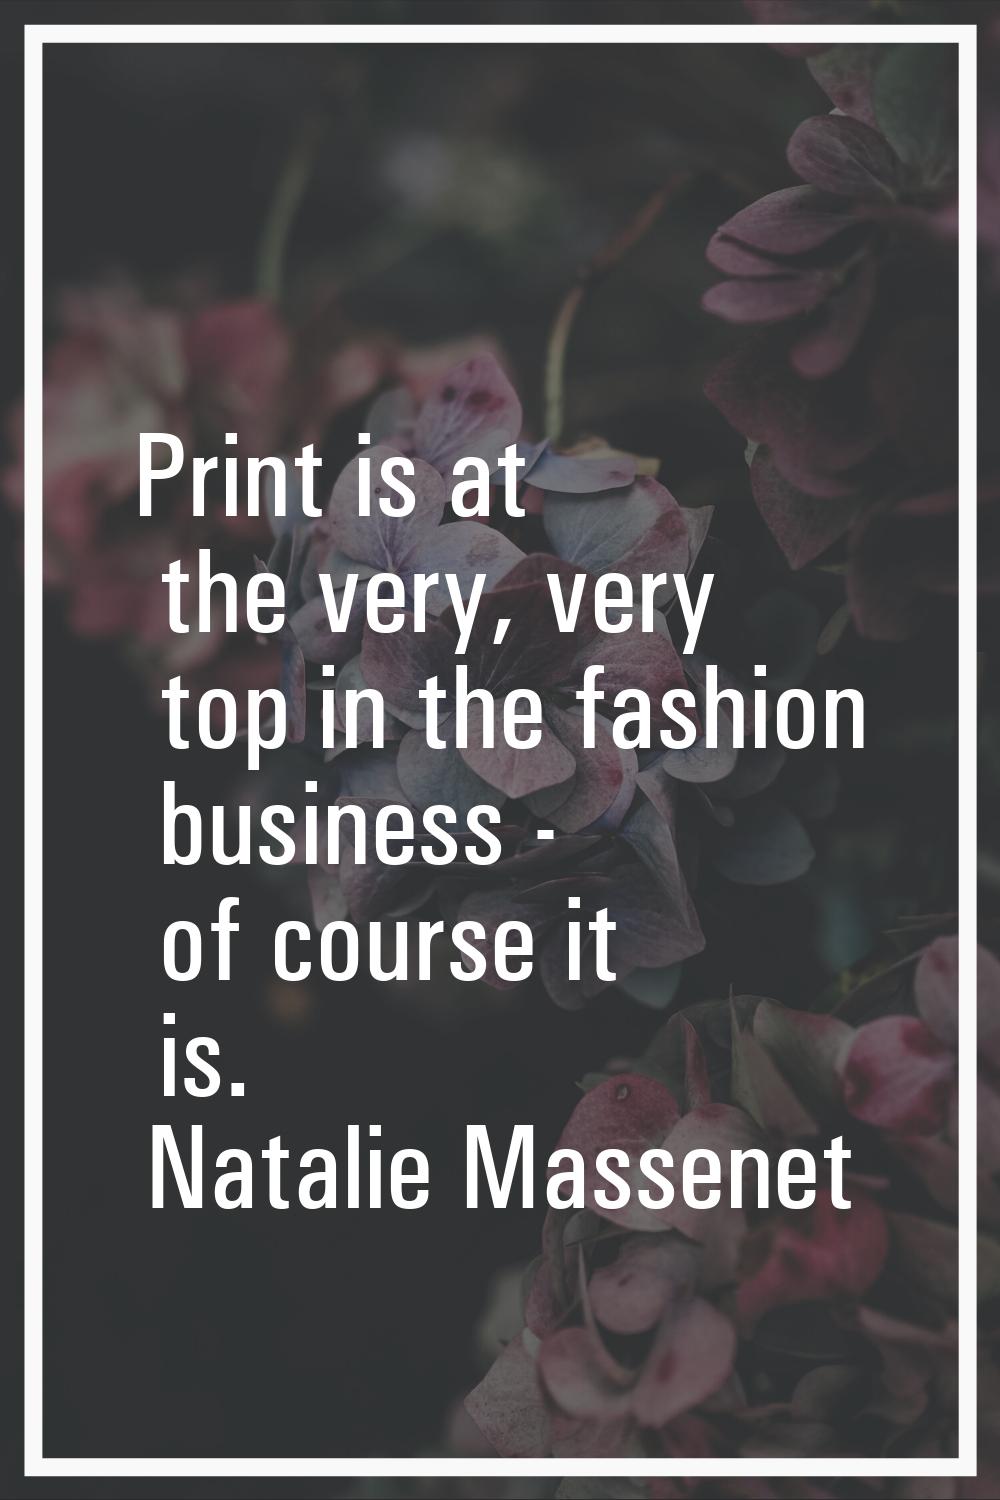 Print is at the very, very top in the fashion business - of course it is.